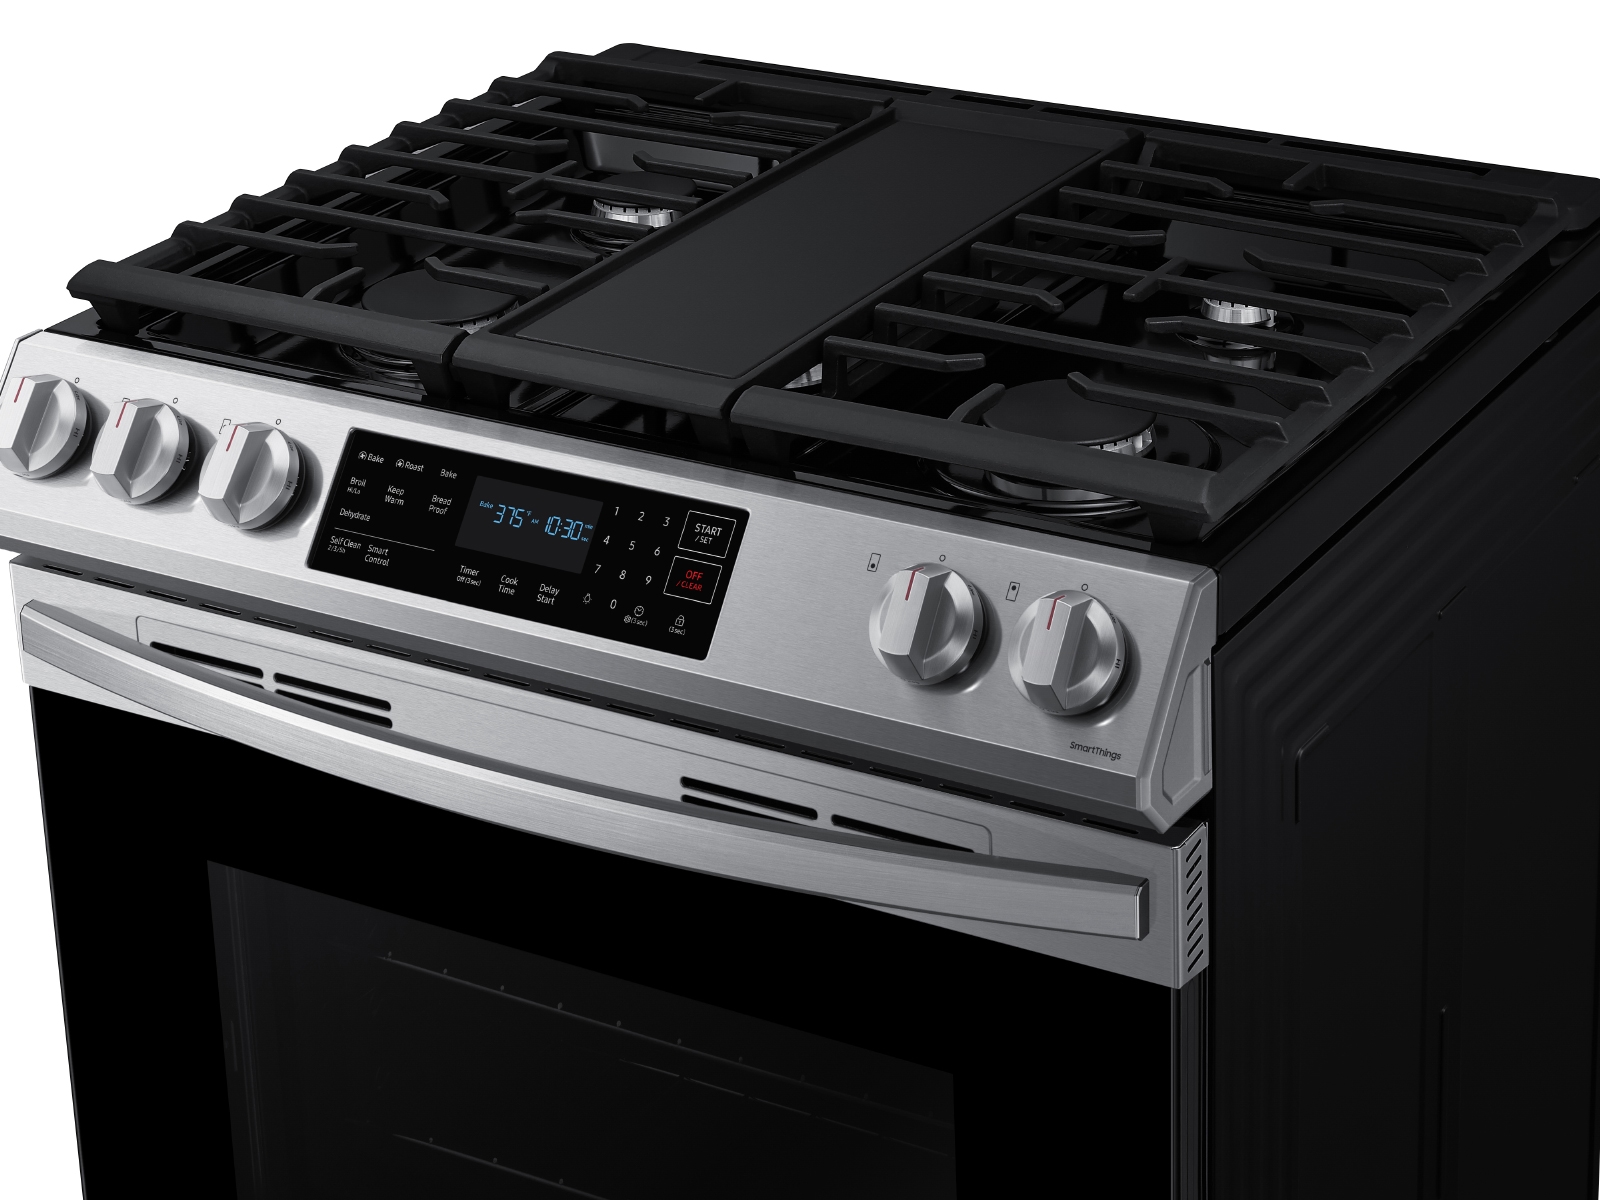 Thumbnail image of 6.0 cu. ft. Smart Slide-in Gas Range with Convection in Stainless Steel